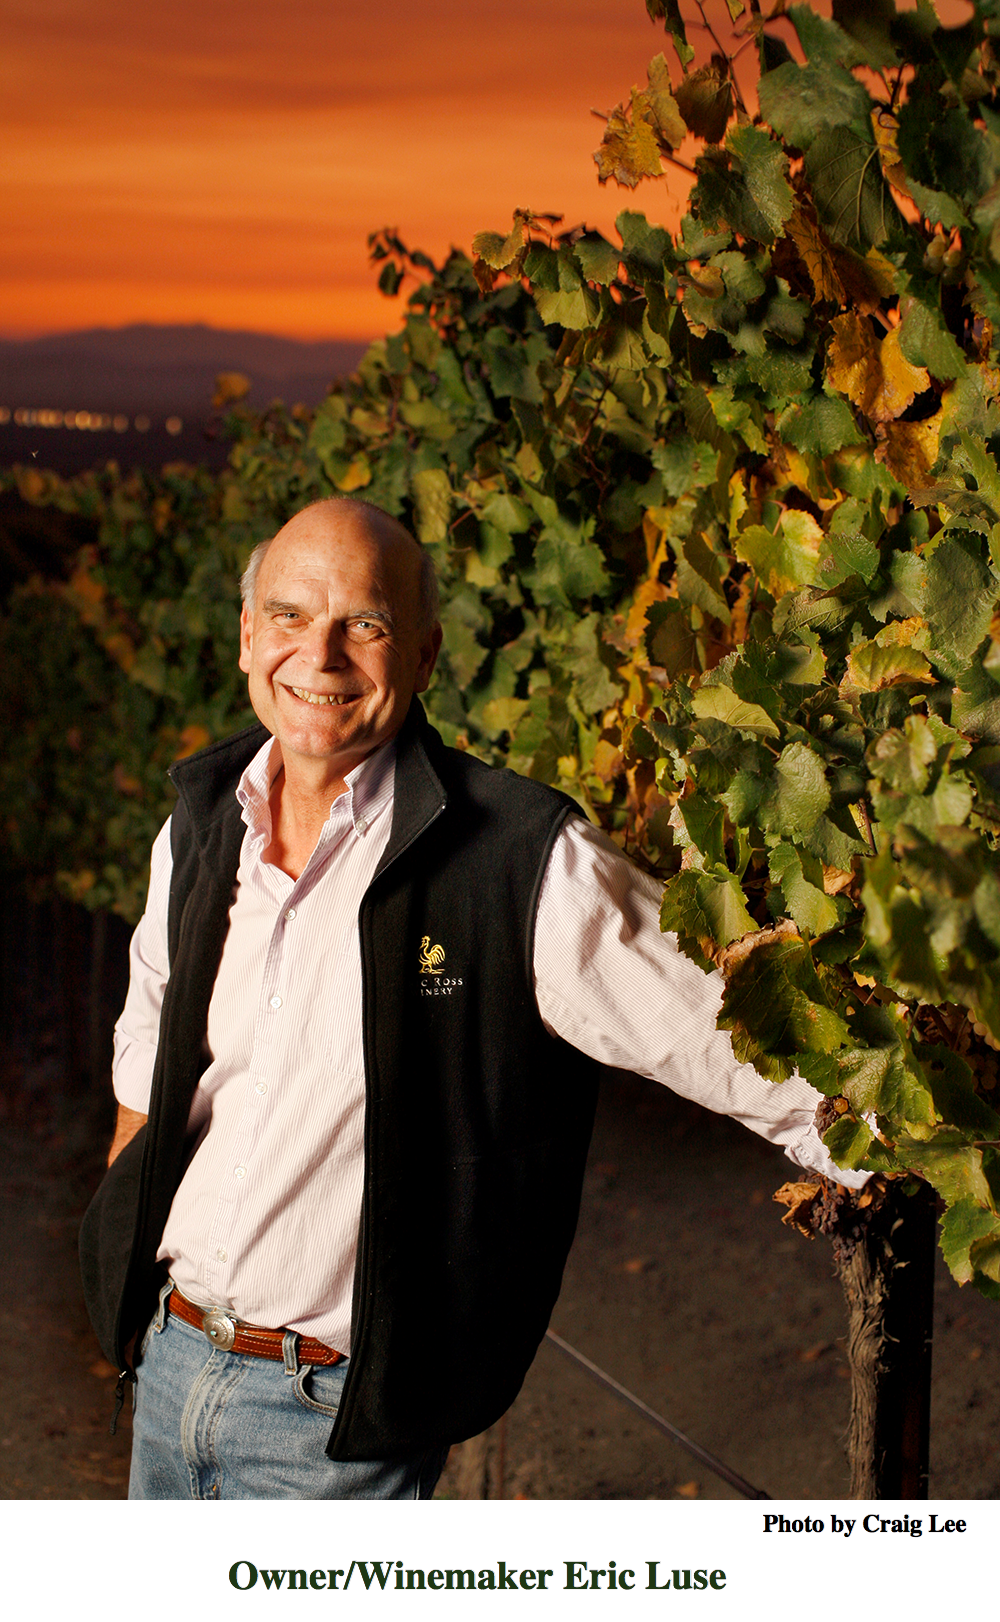 Owner/Winemaker Eric Luse in the vineyard at sunset